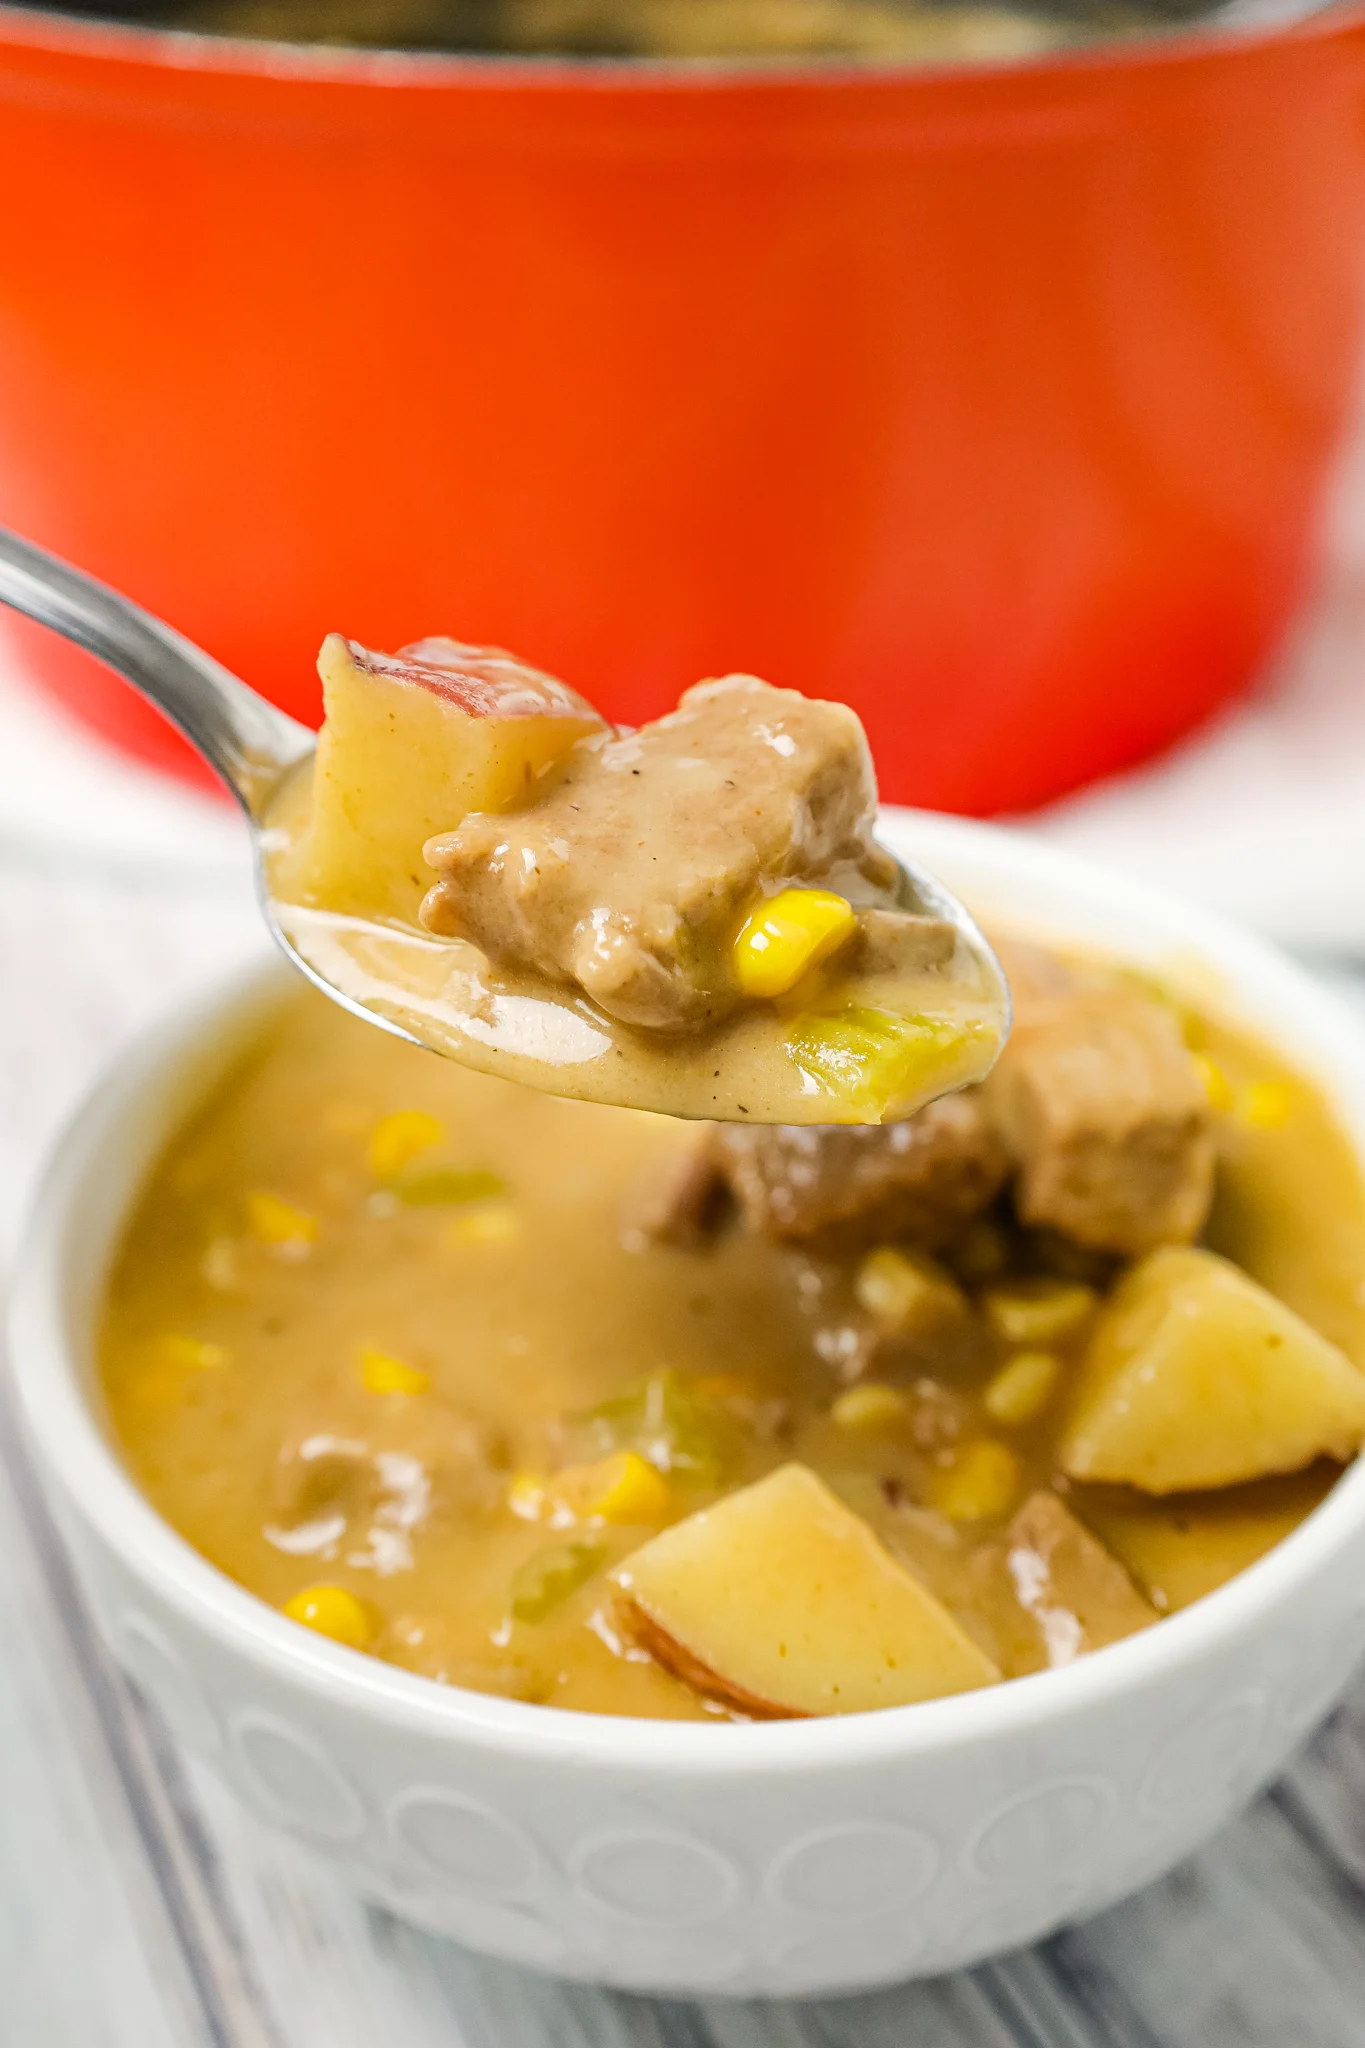 Steak and Potato Soup is a hearty soup recipe loaded with chunks of steak, potatoes, chopped celery and corn.